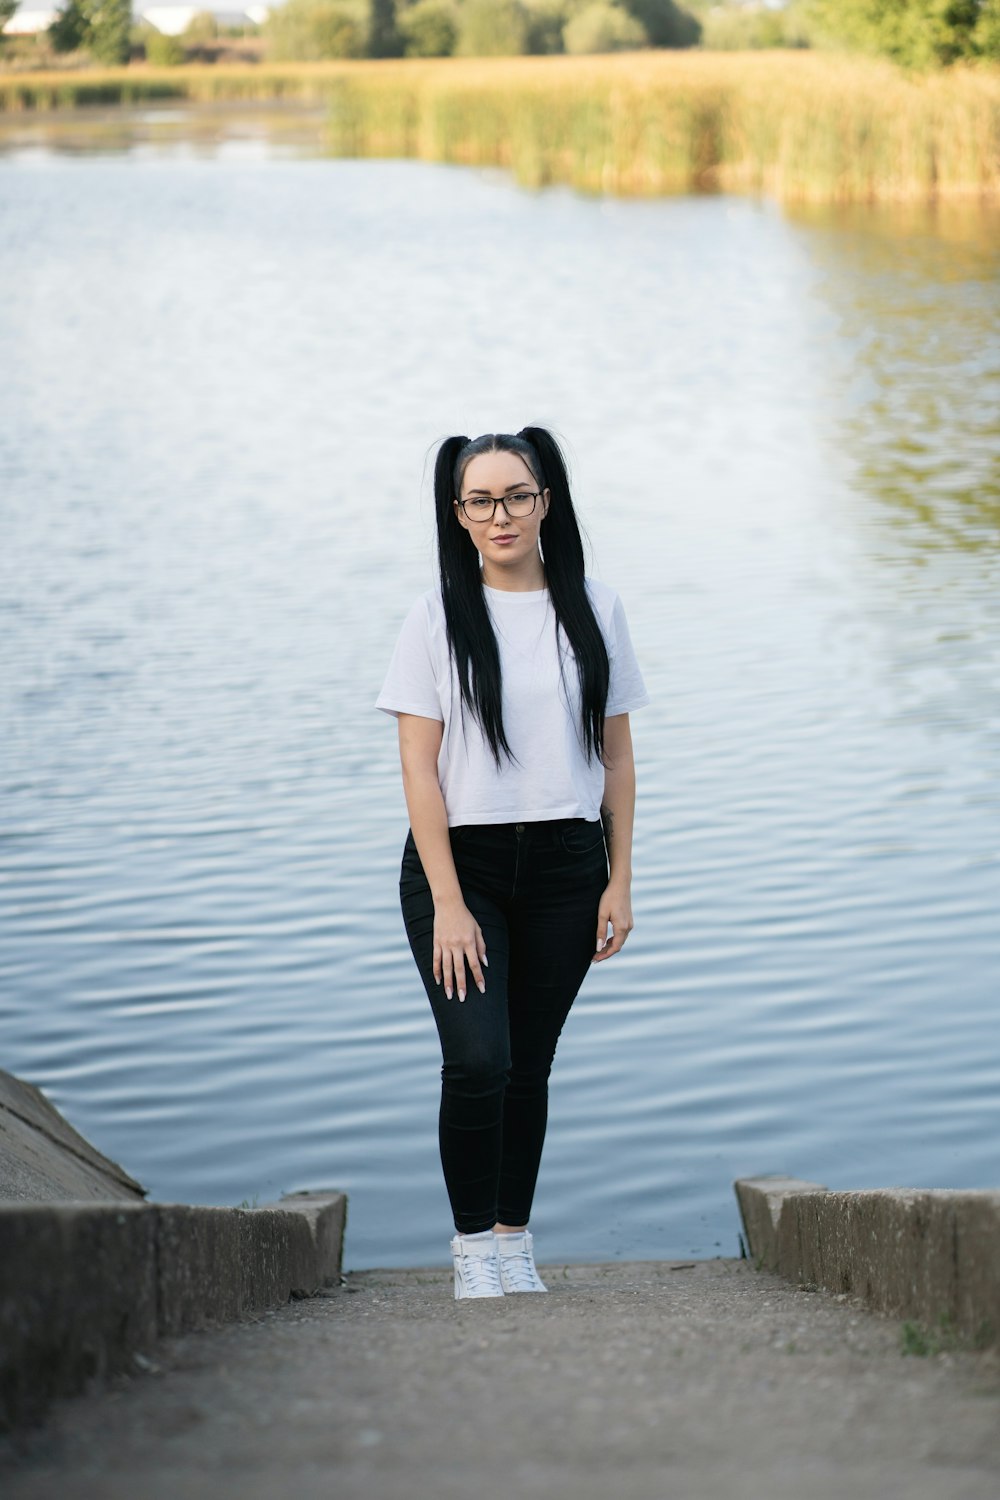 a woman with long black hair and glasses standing on steps near a body of water